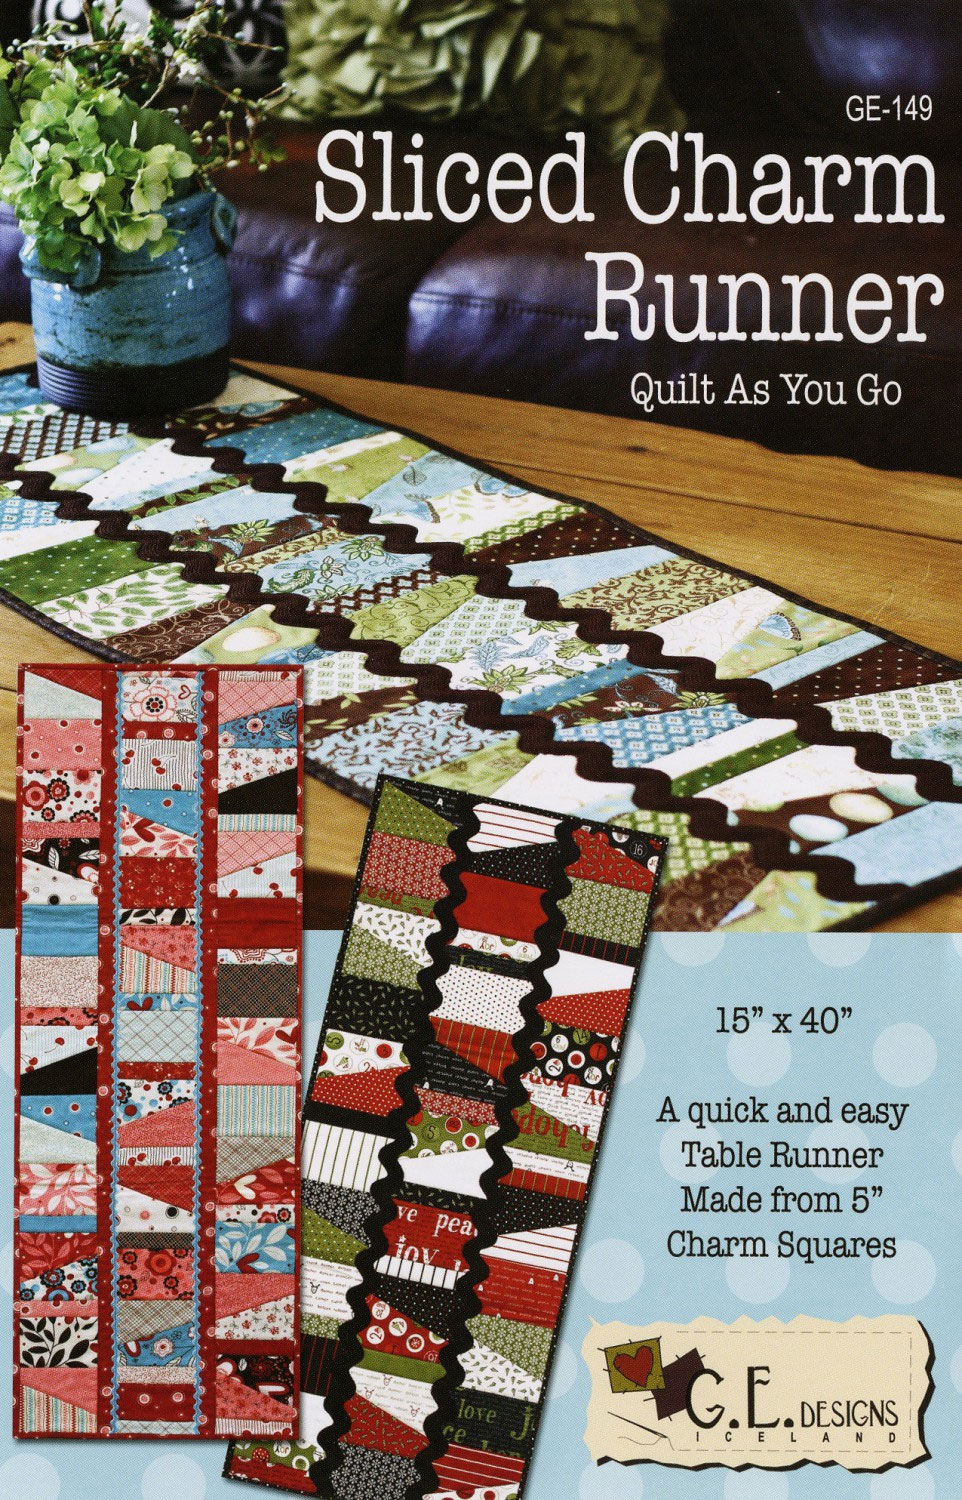 Sliced-Charm-Runner-table-runner-sewing-pattern-GE-Designs-front